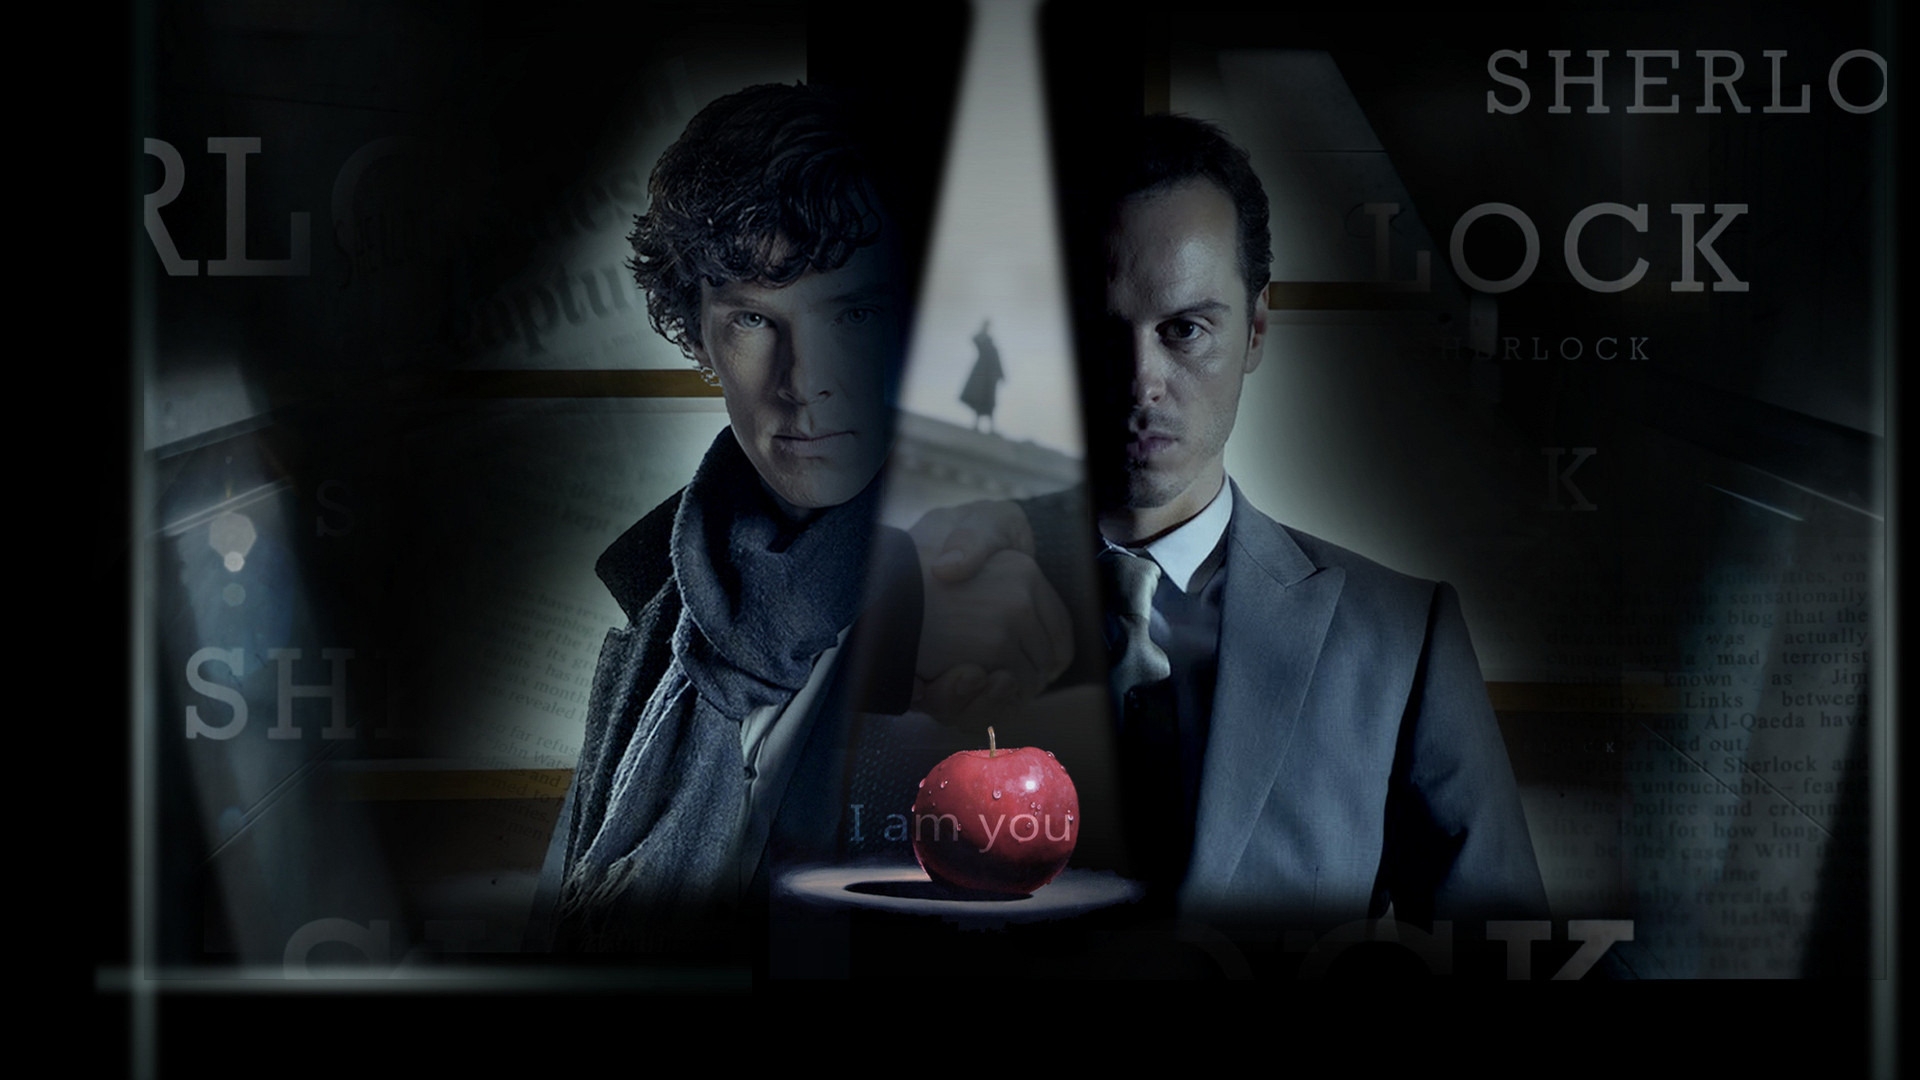 Sherlock and Moriarty for 1920 x 1080 HDTV 1080p resolution